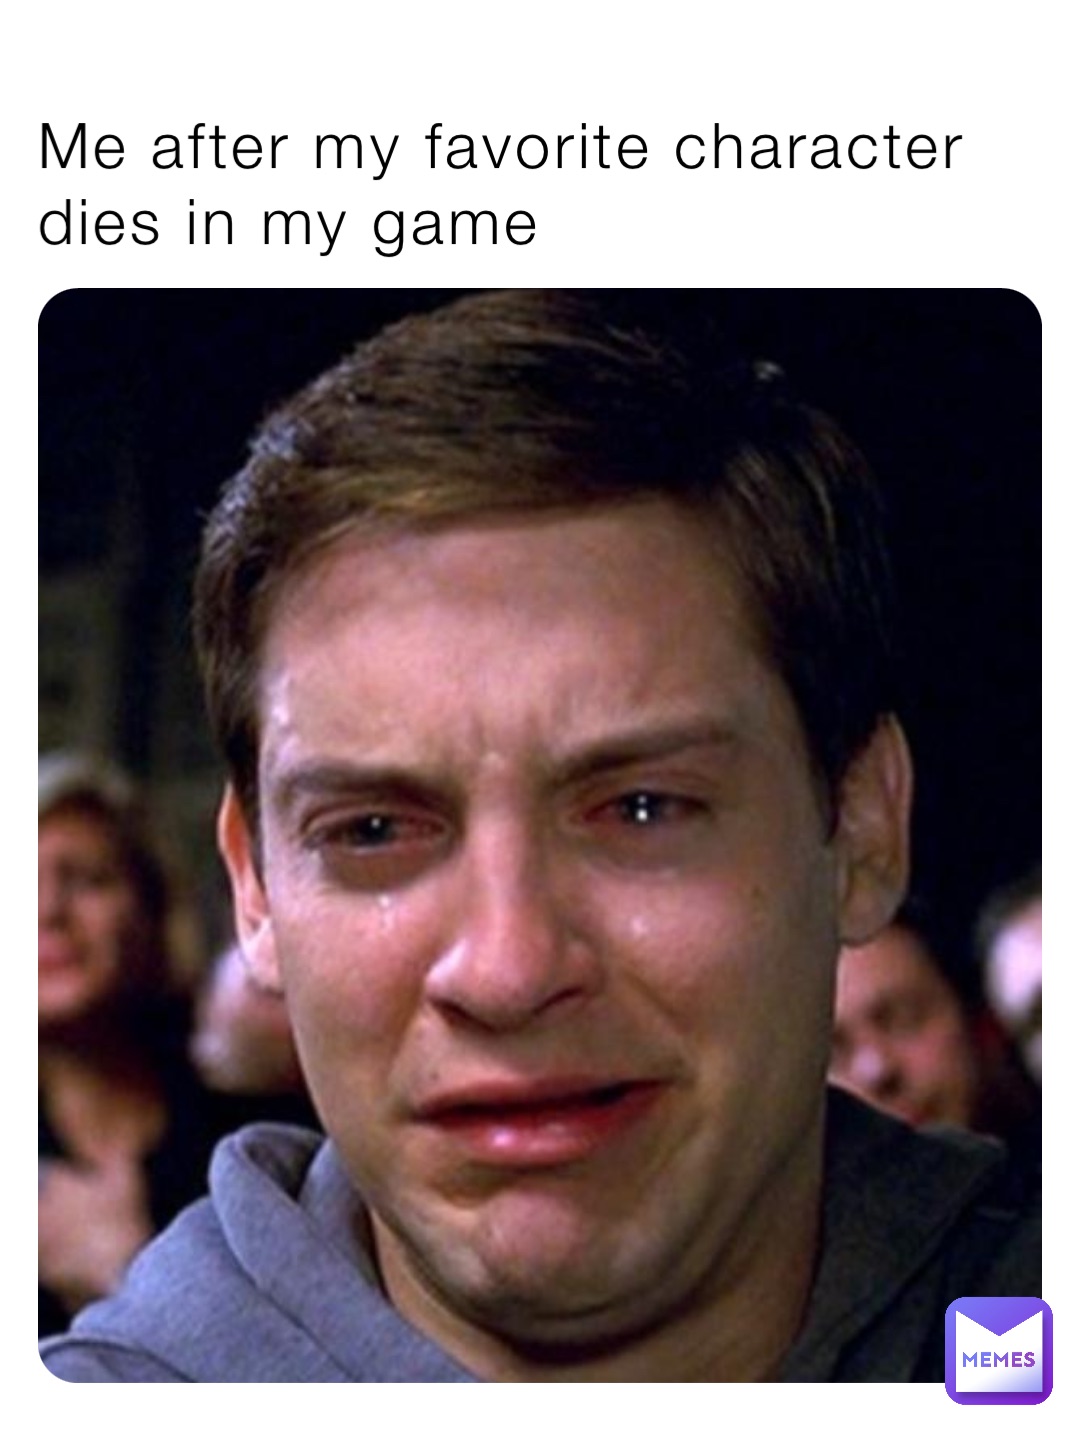 Me after my favorite character dies in my game